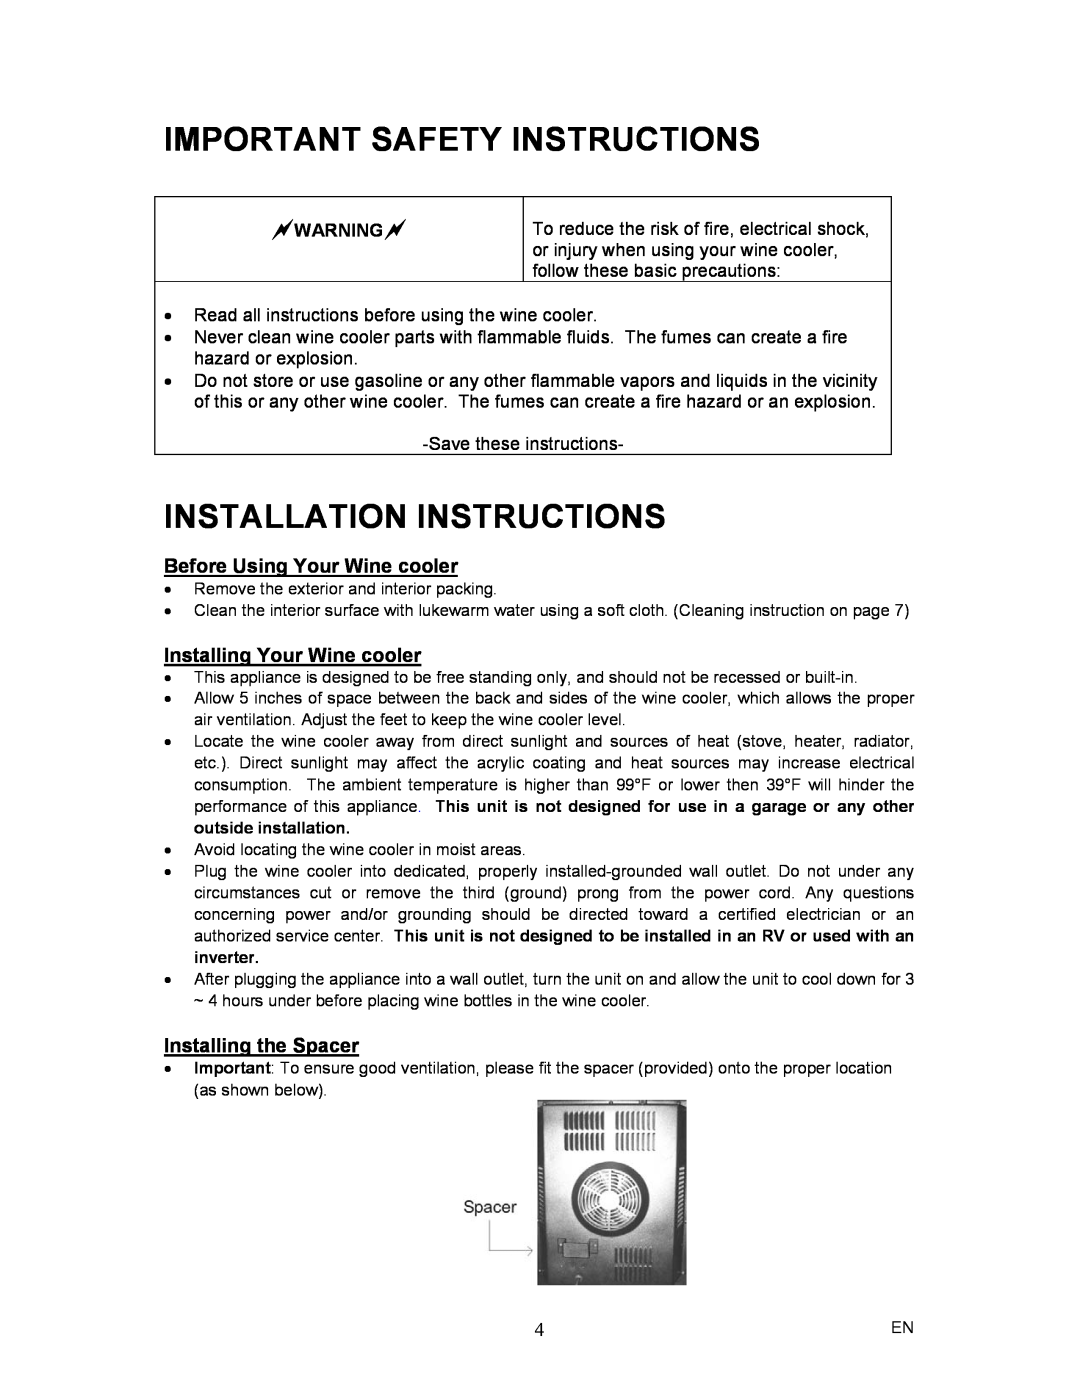 Magic Chef MCWC12SV Important Safety Instructions, Installation Instructions, Before Using Your Wine cooler 